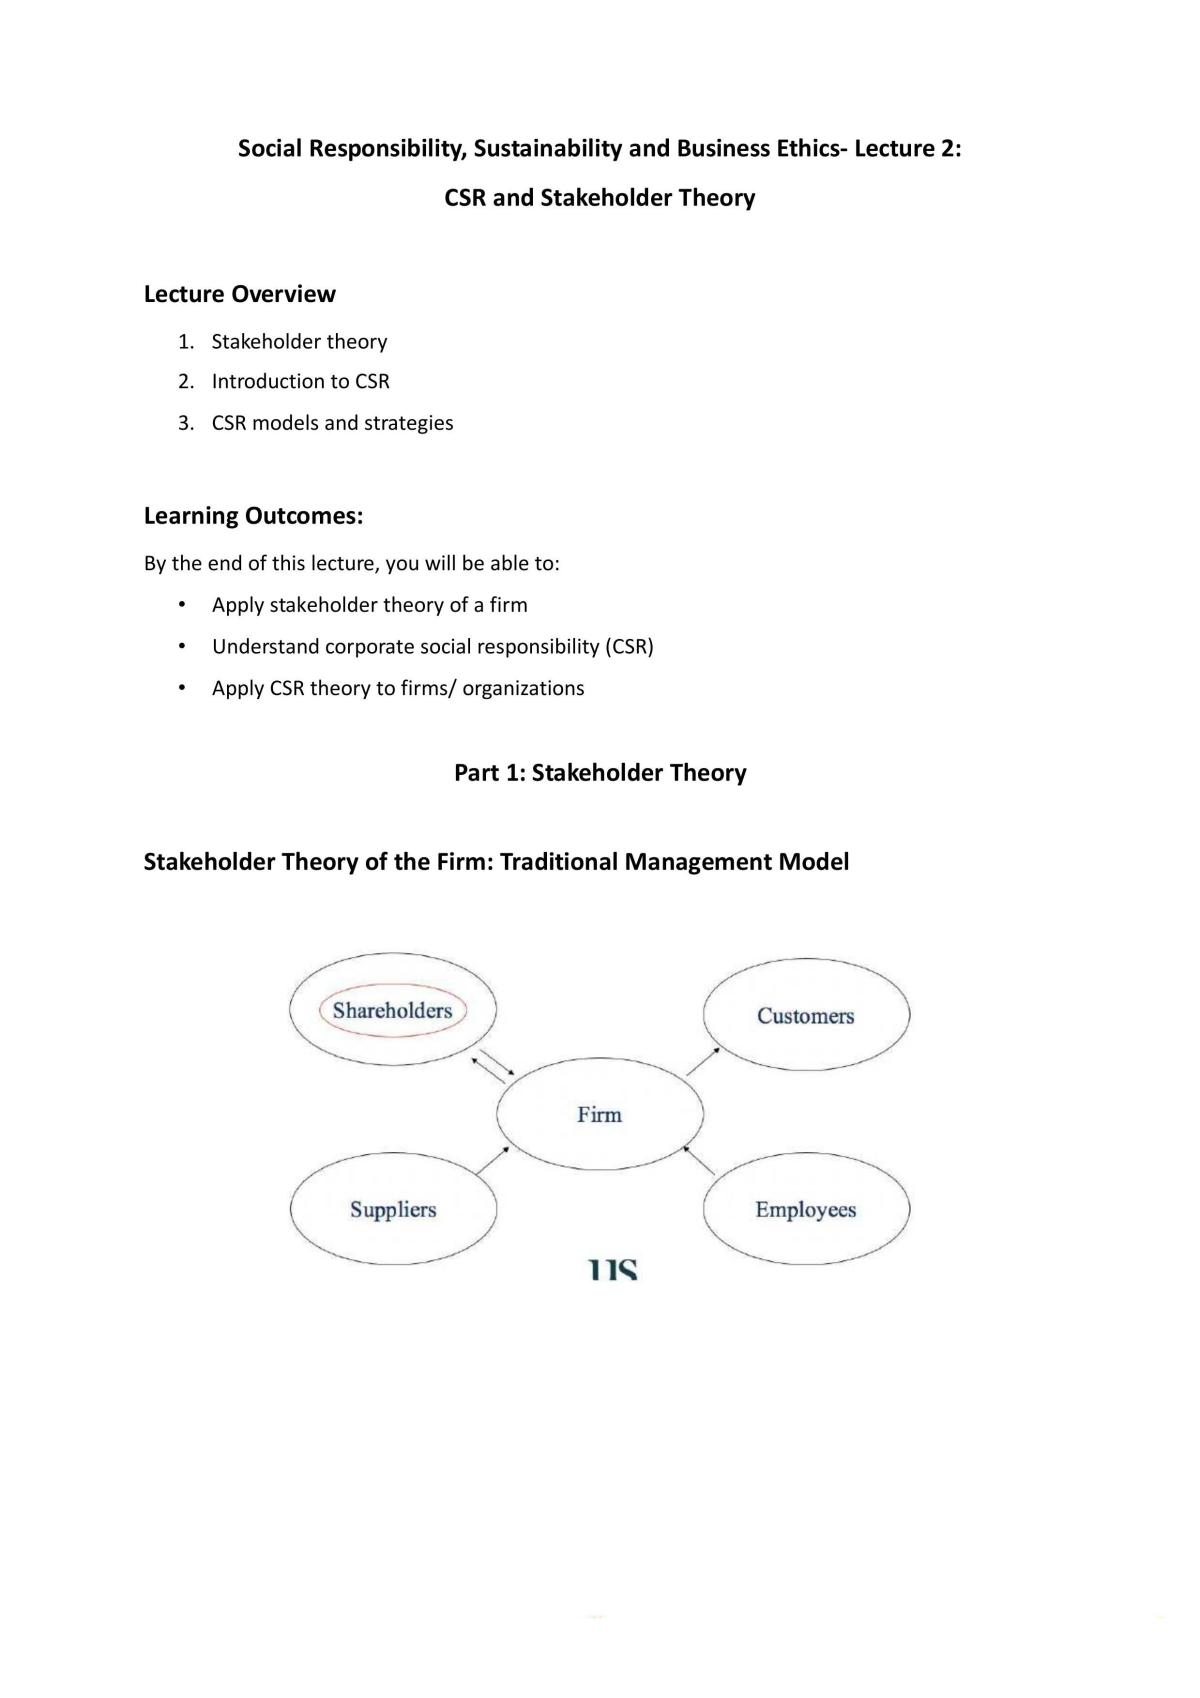 CSR and Stakeholder Theory Notes - Page 1